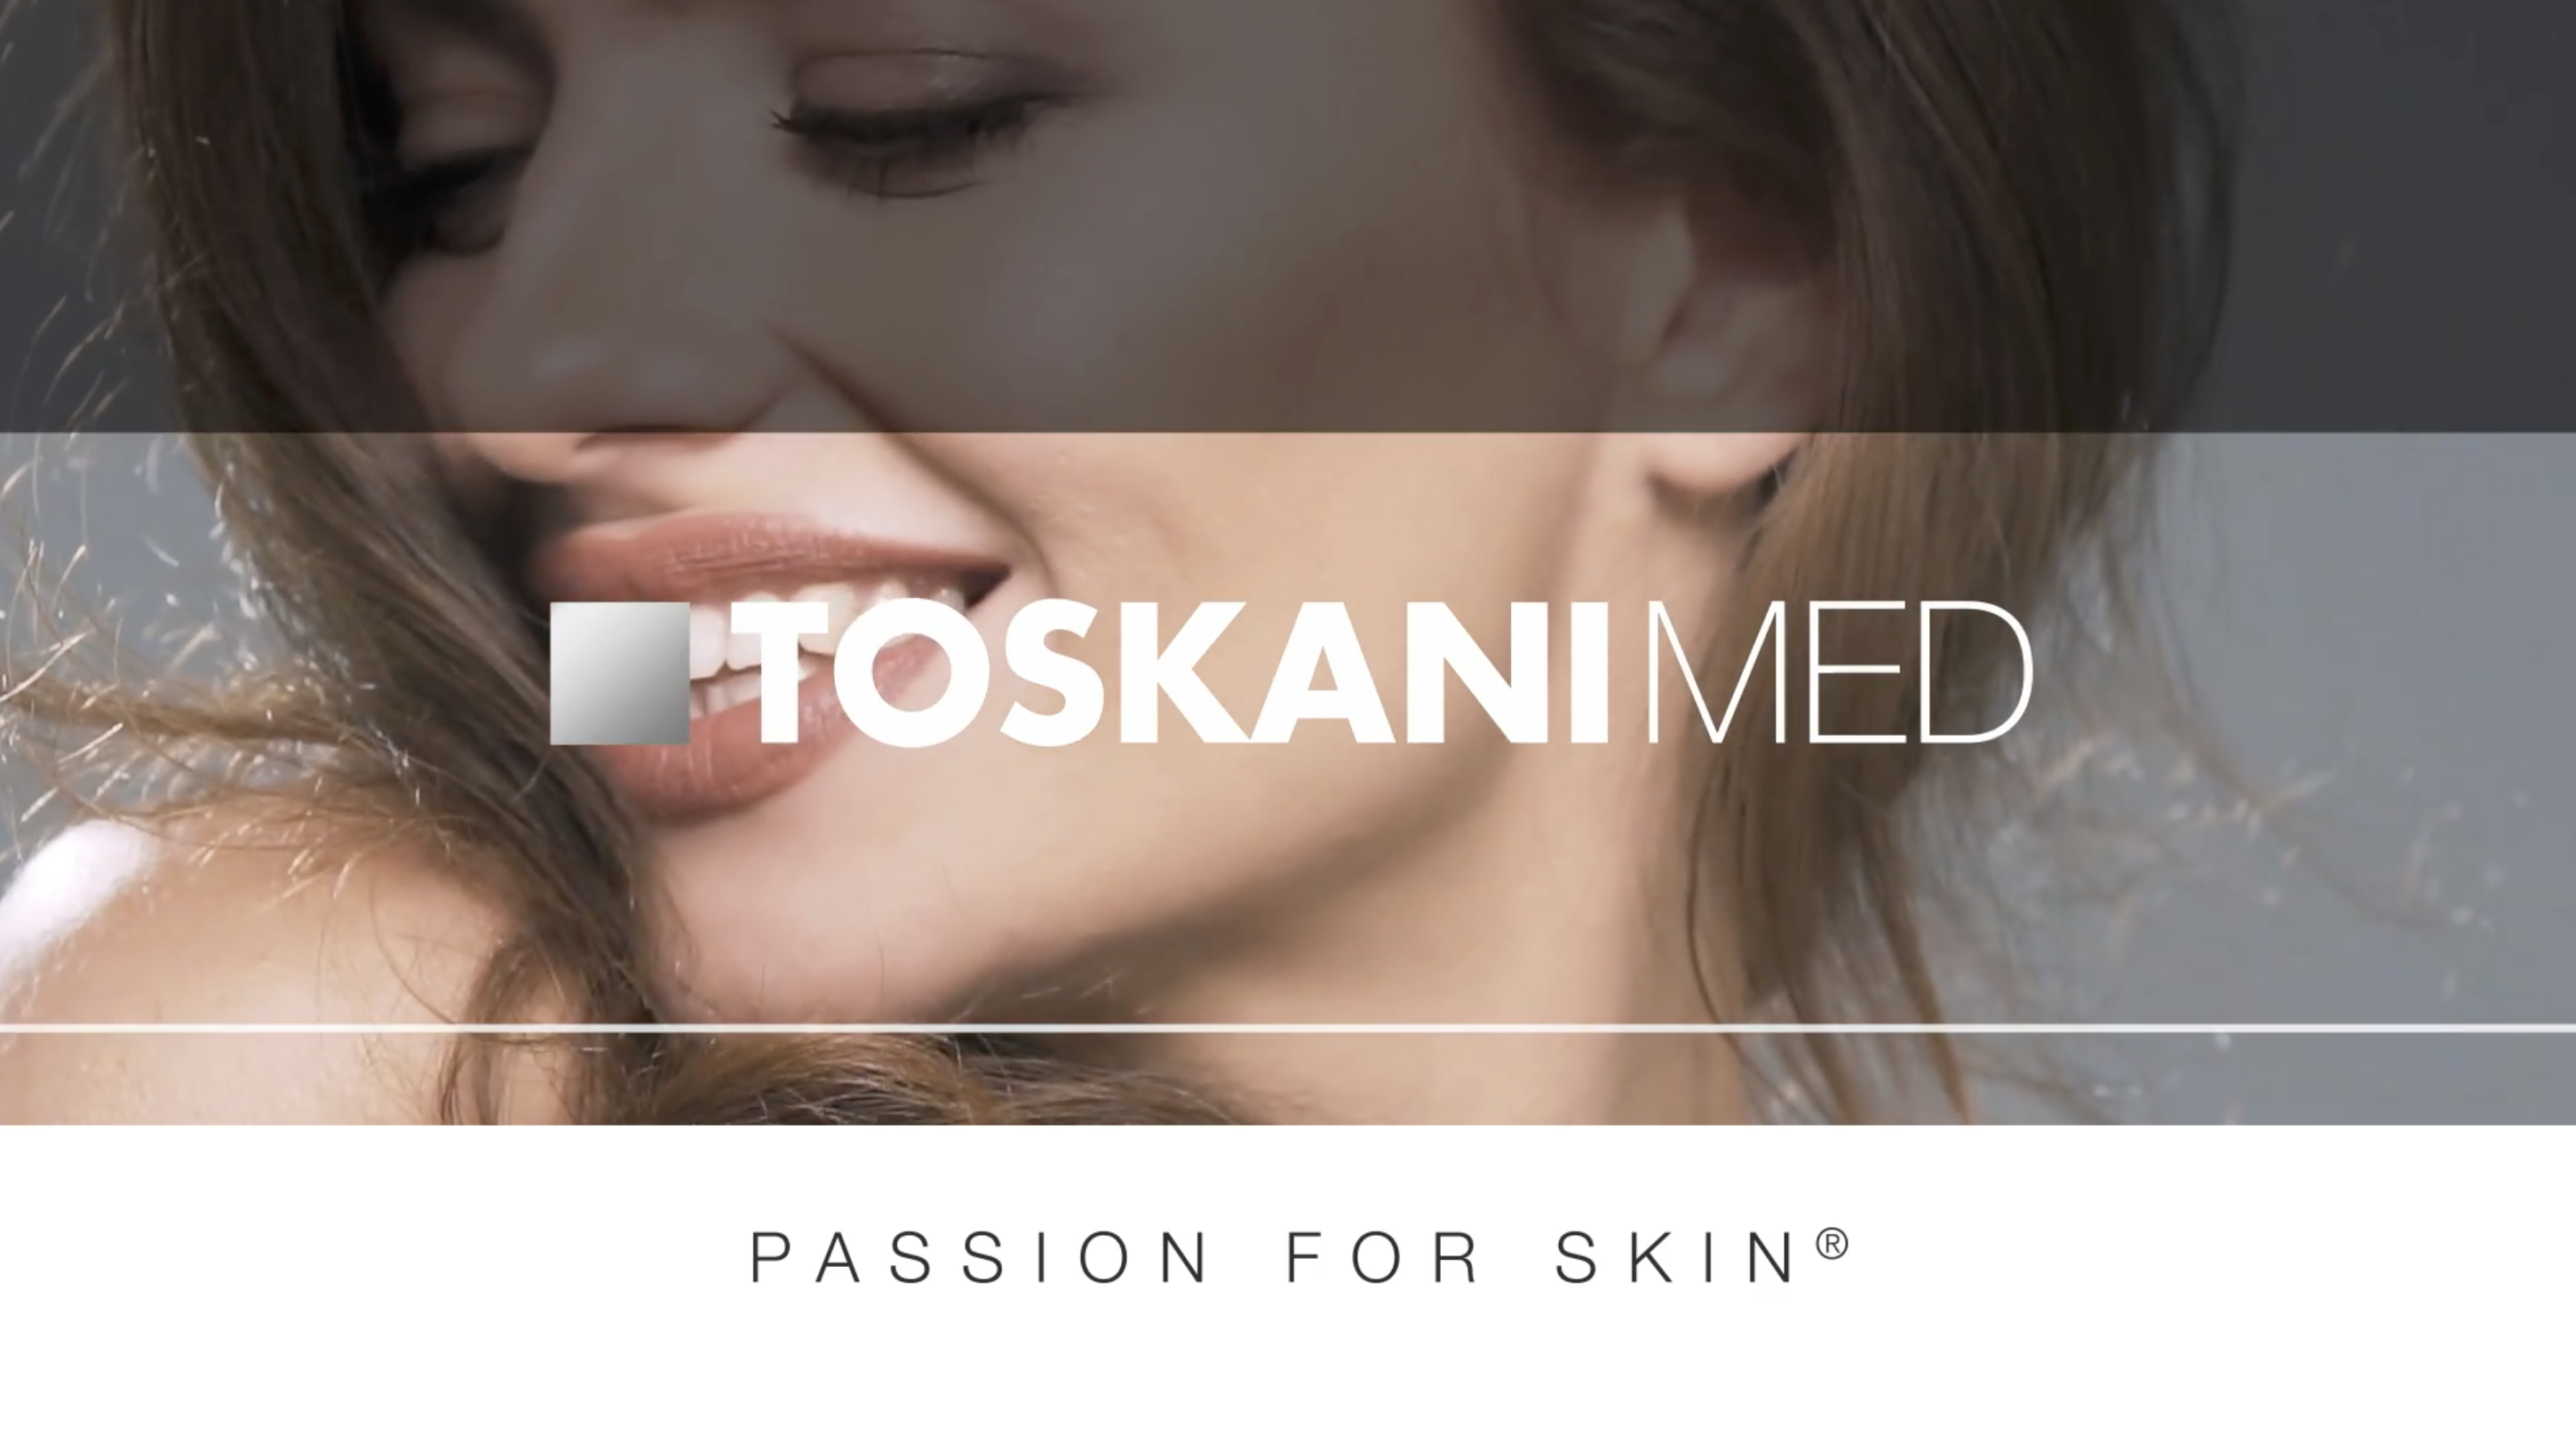 Passion for Skin